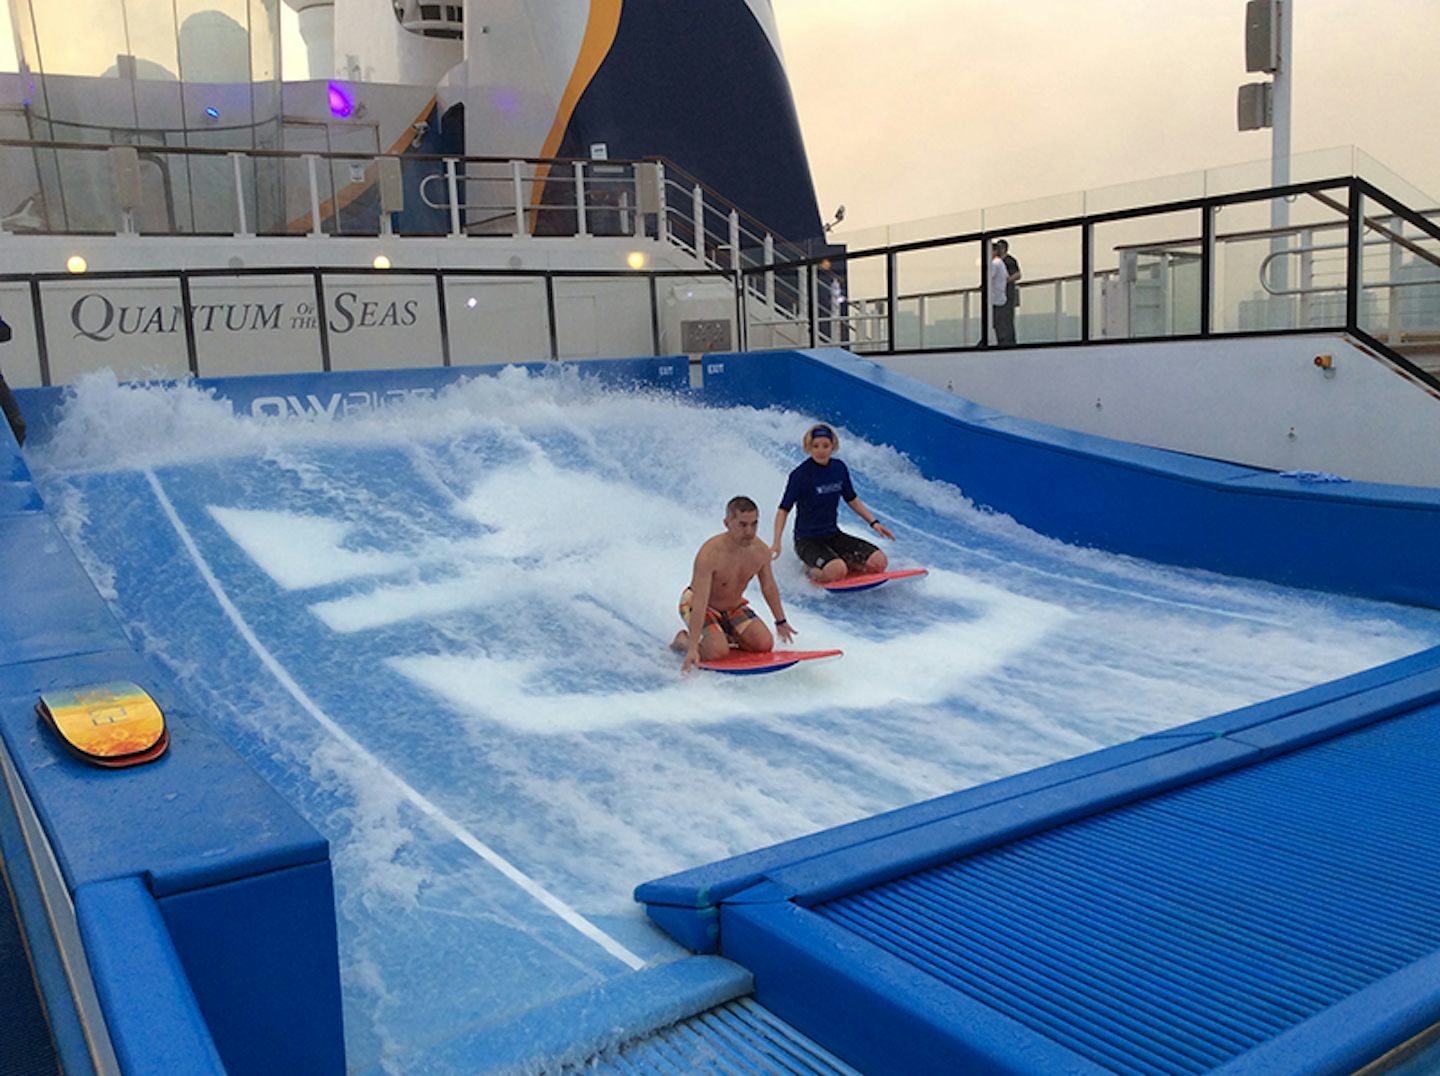 No crowds around the FlowRider... lots of time to enjoy the ride.